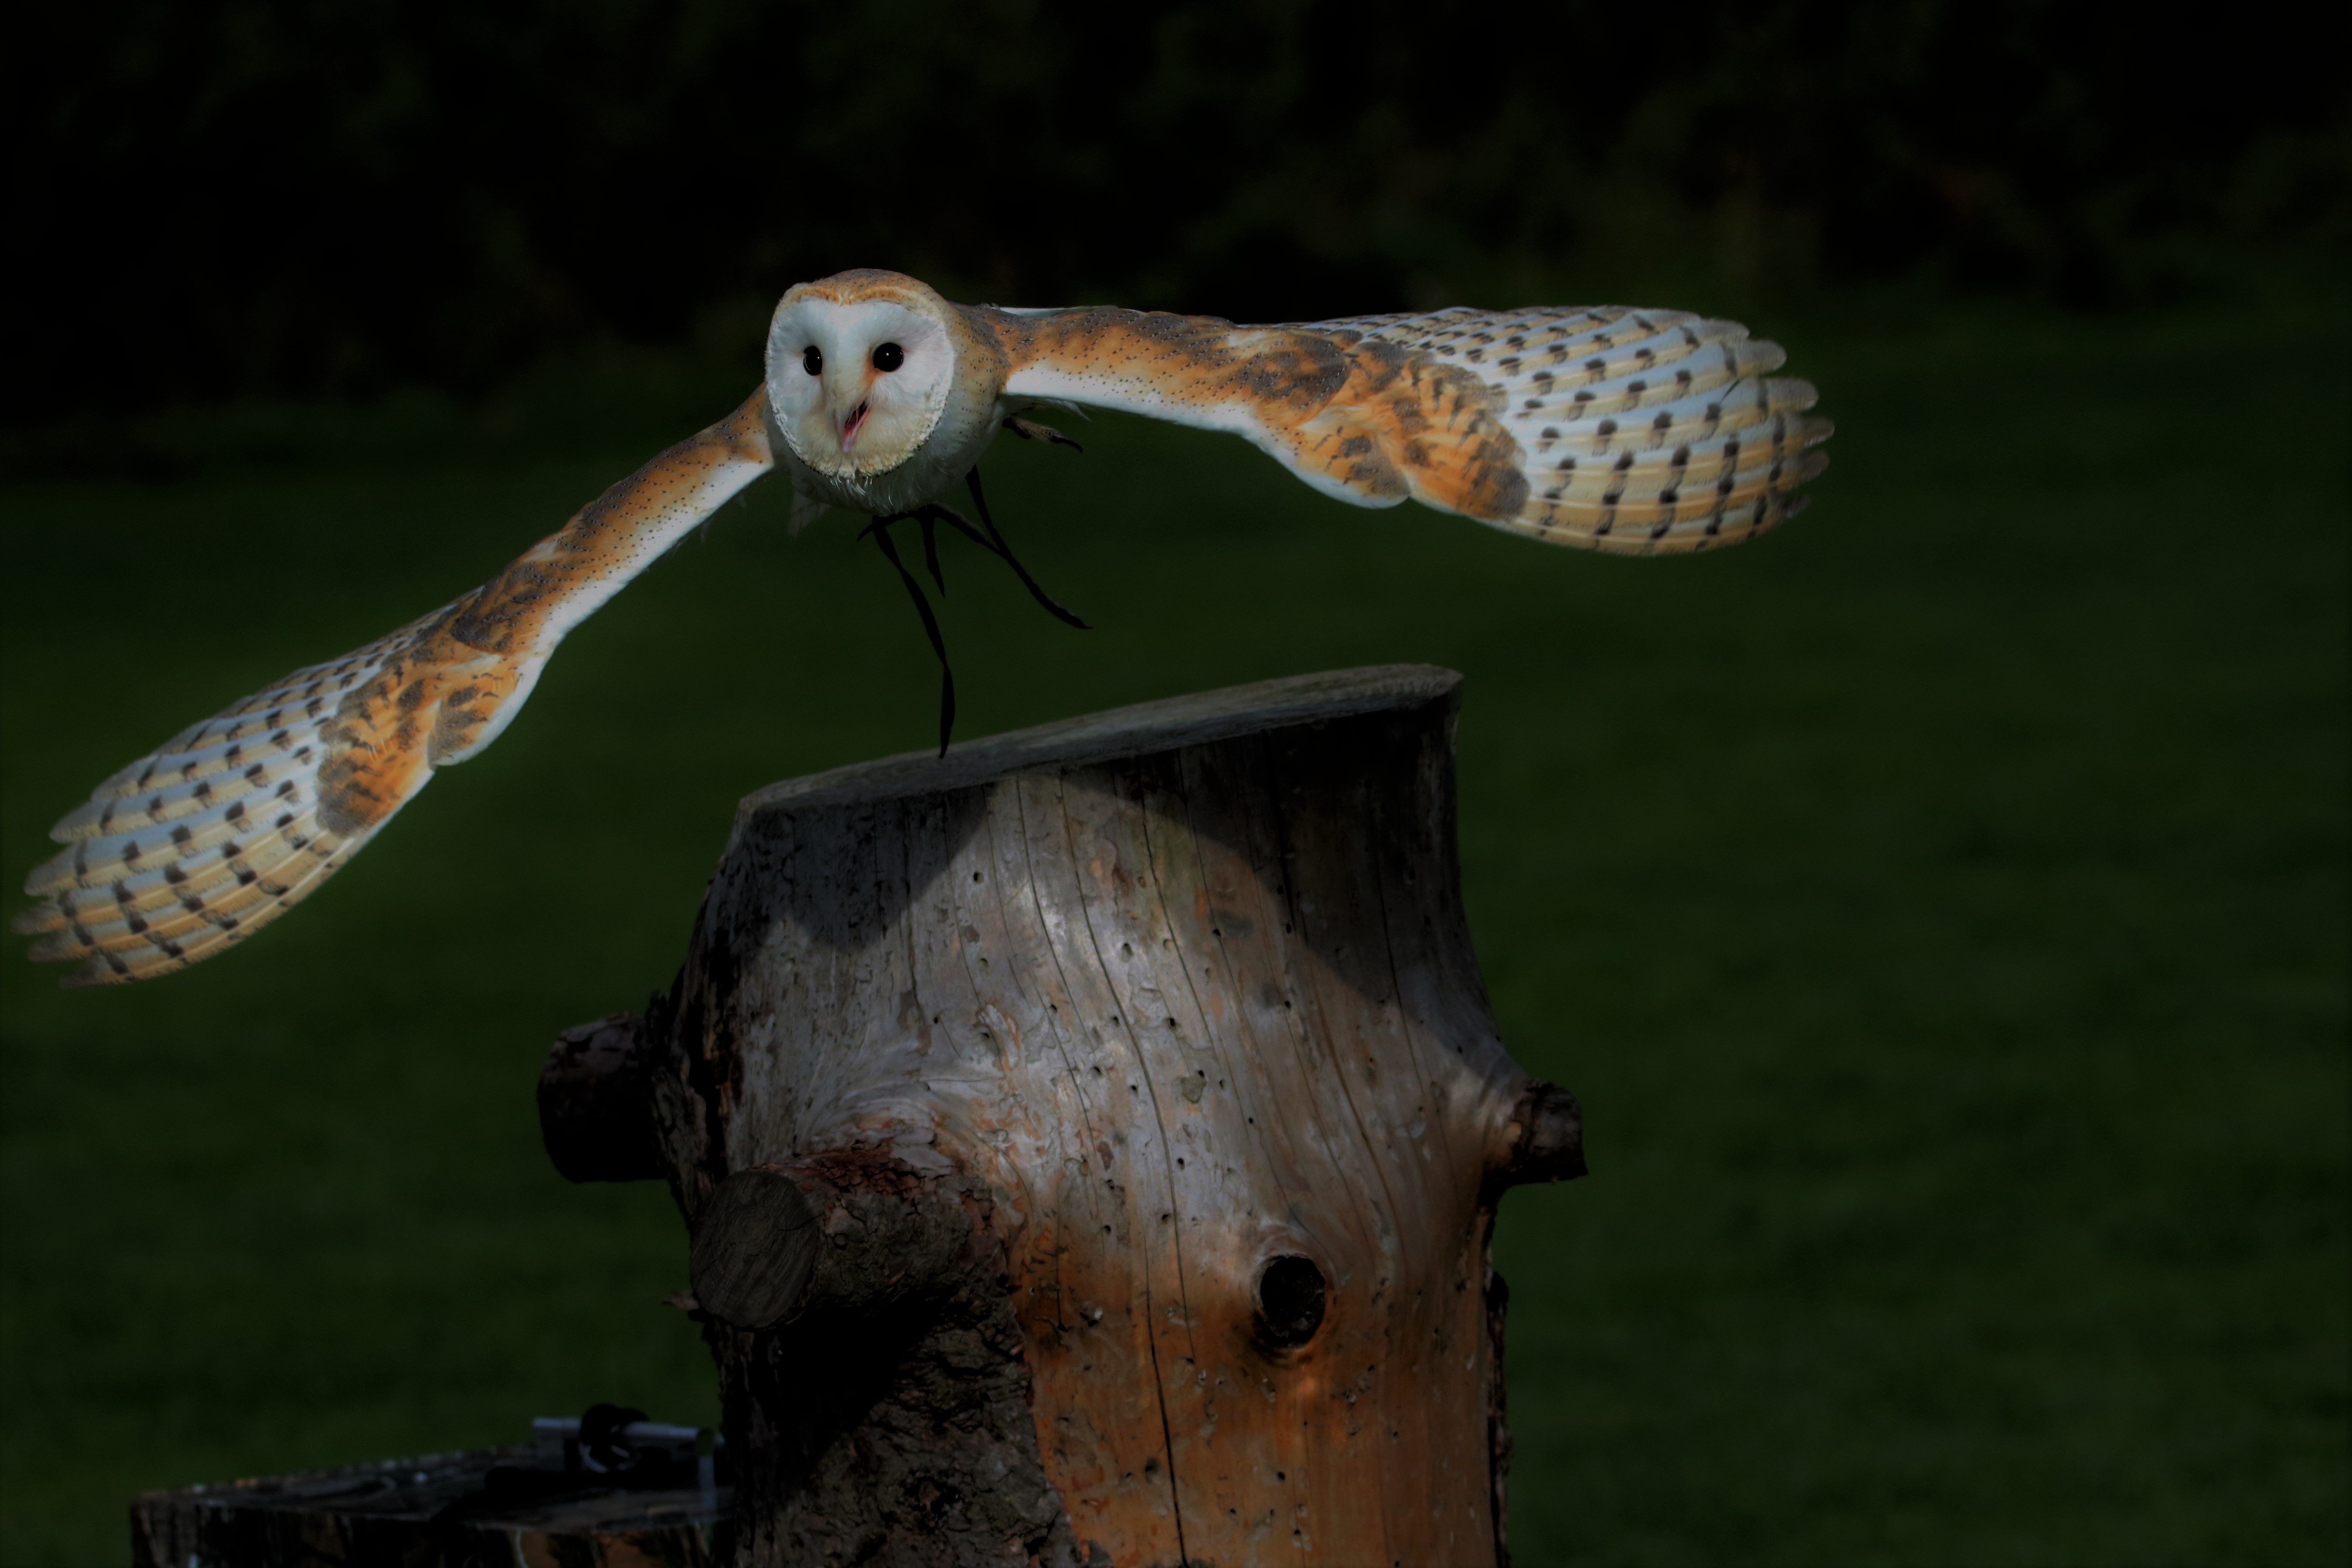 Barn owl taking off by Kdsphotos